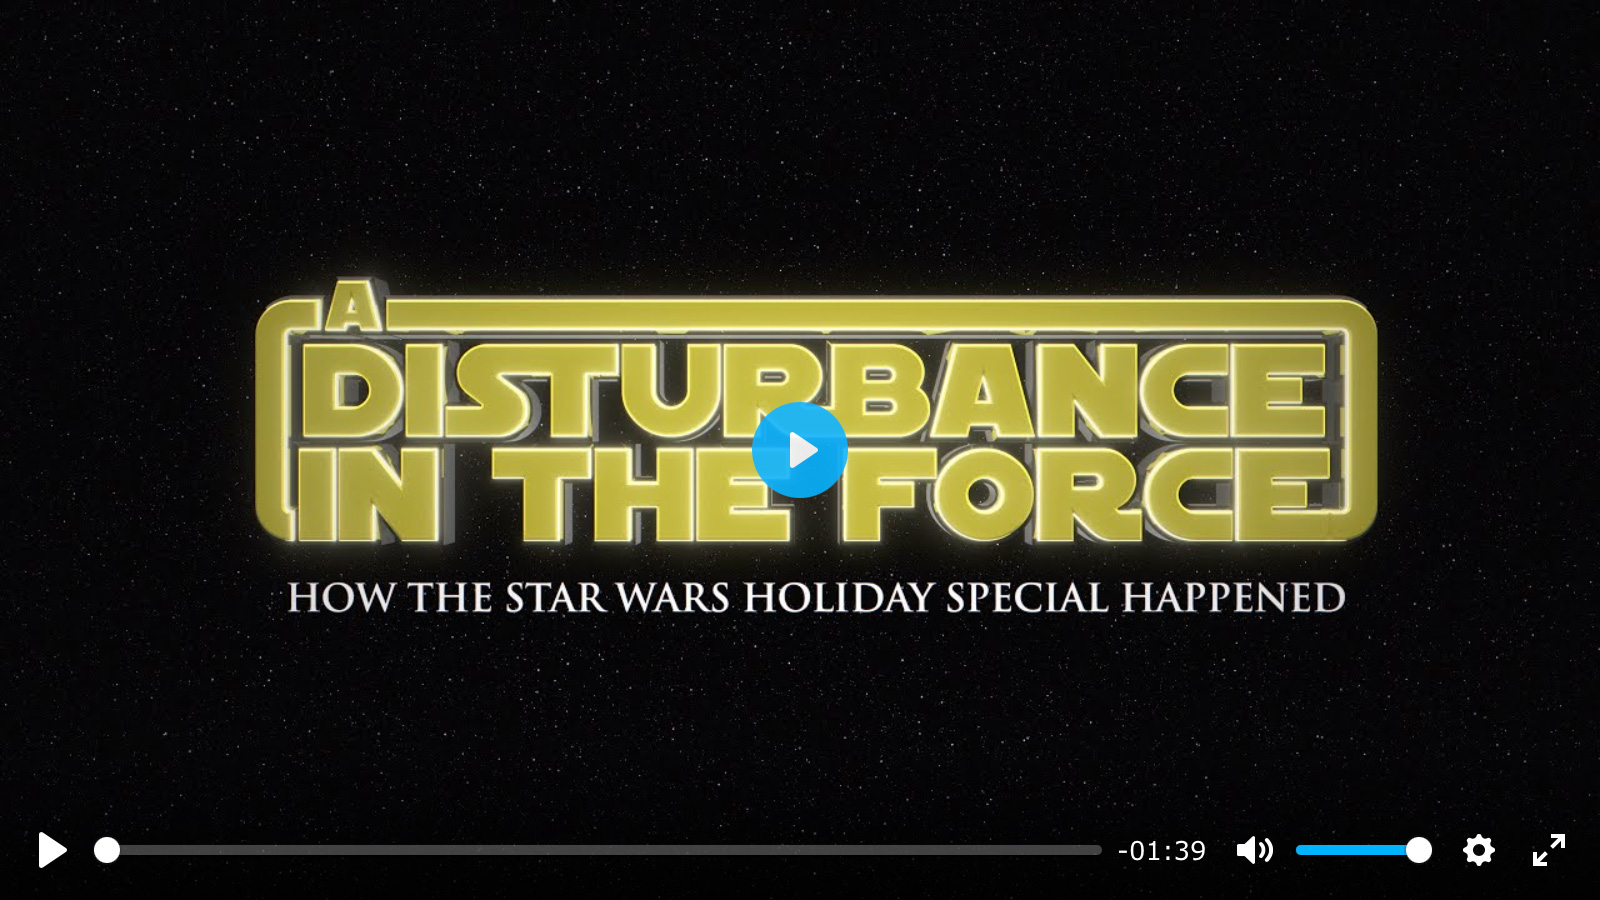 A Disturbance In The Force Trailer - Documentary On How The 1978 Star Wars Holiday Special Happened